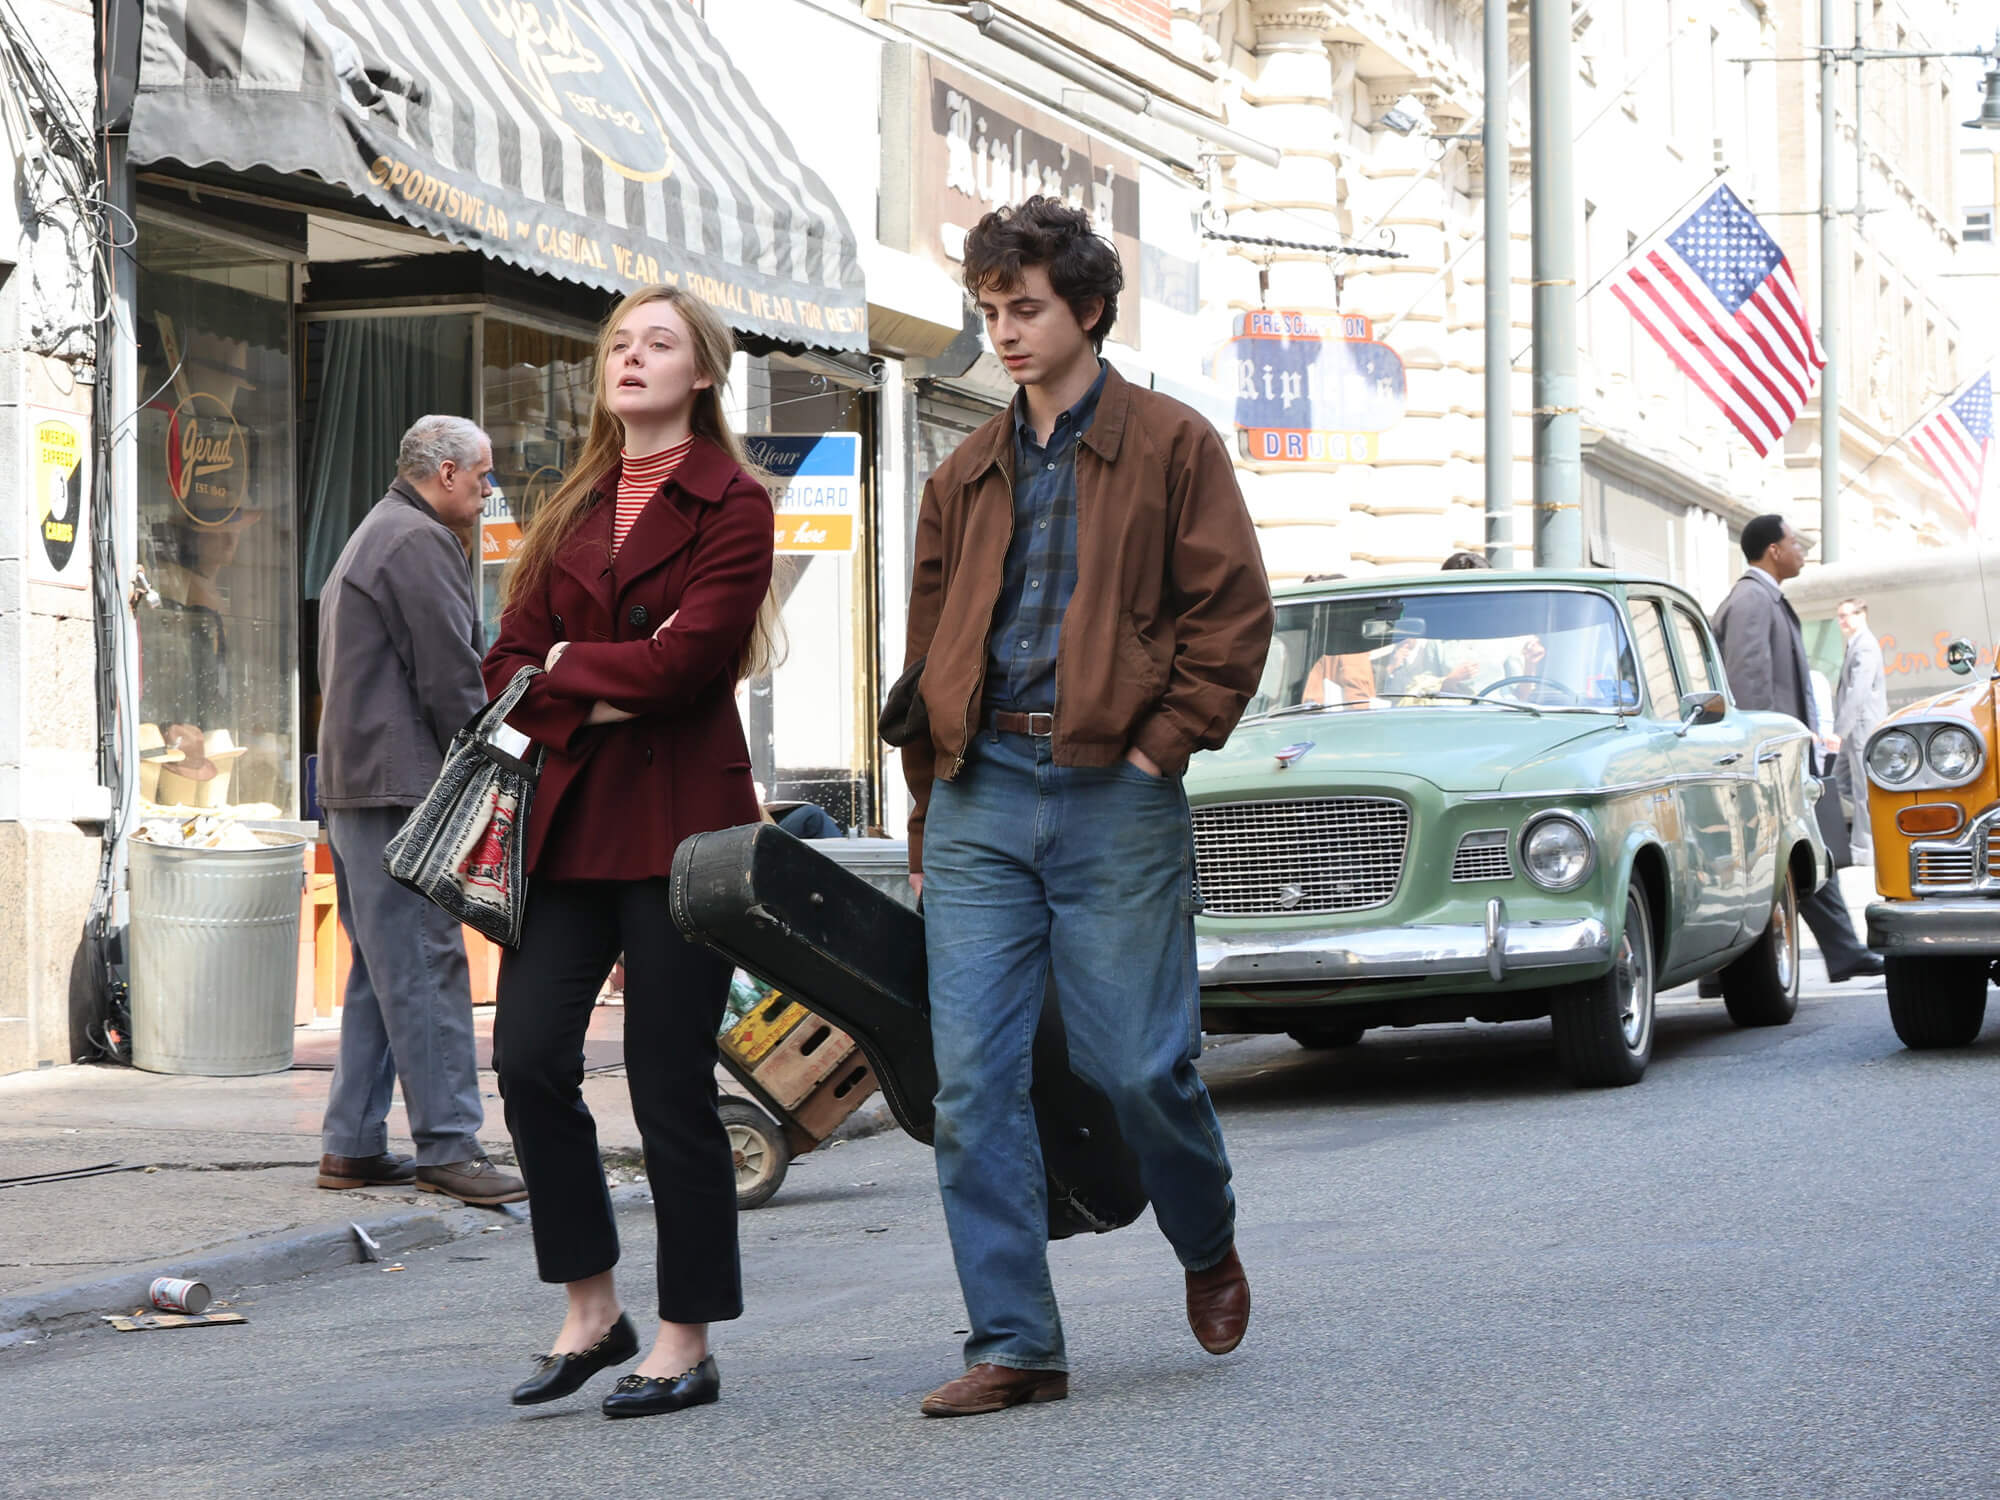 Timothee Chalamet on set of the new Bob Dylan biopic. He is captured wearing a brown jacket and holding a guitar case walking through a street.